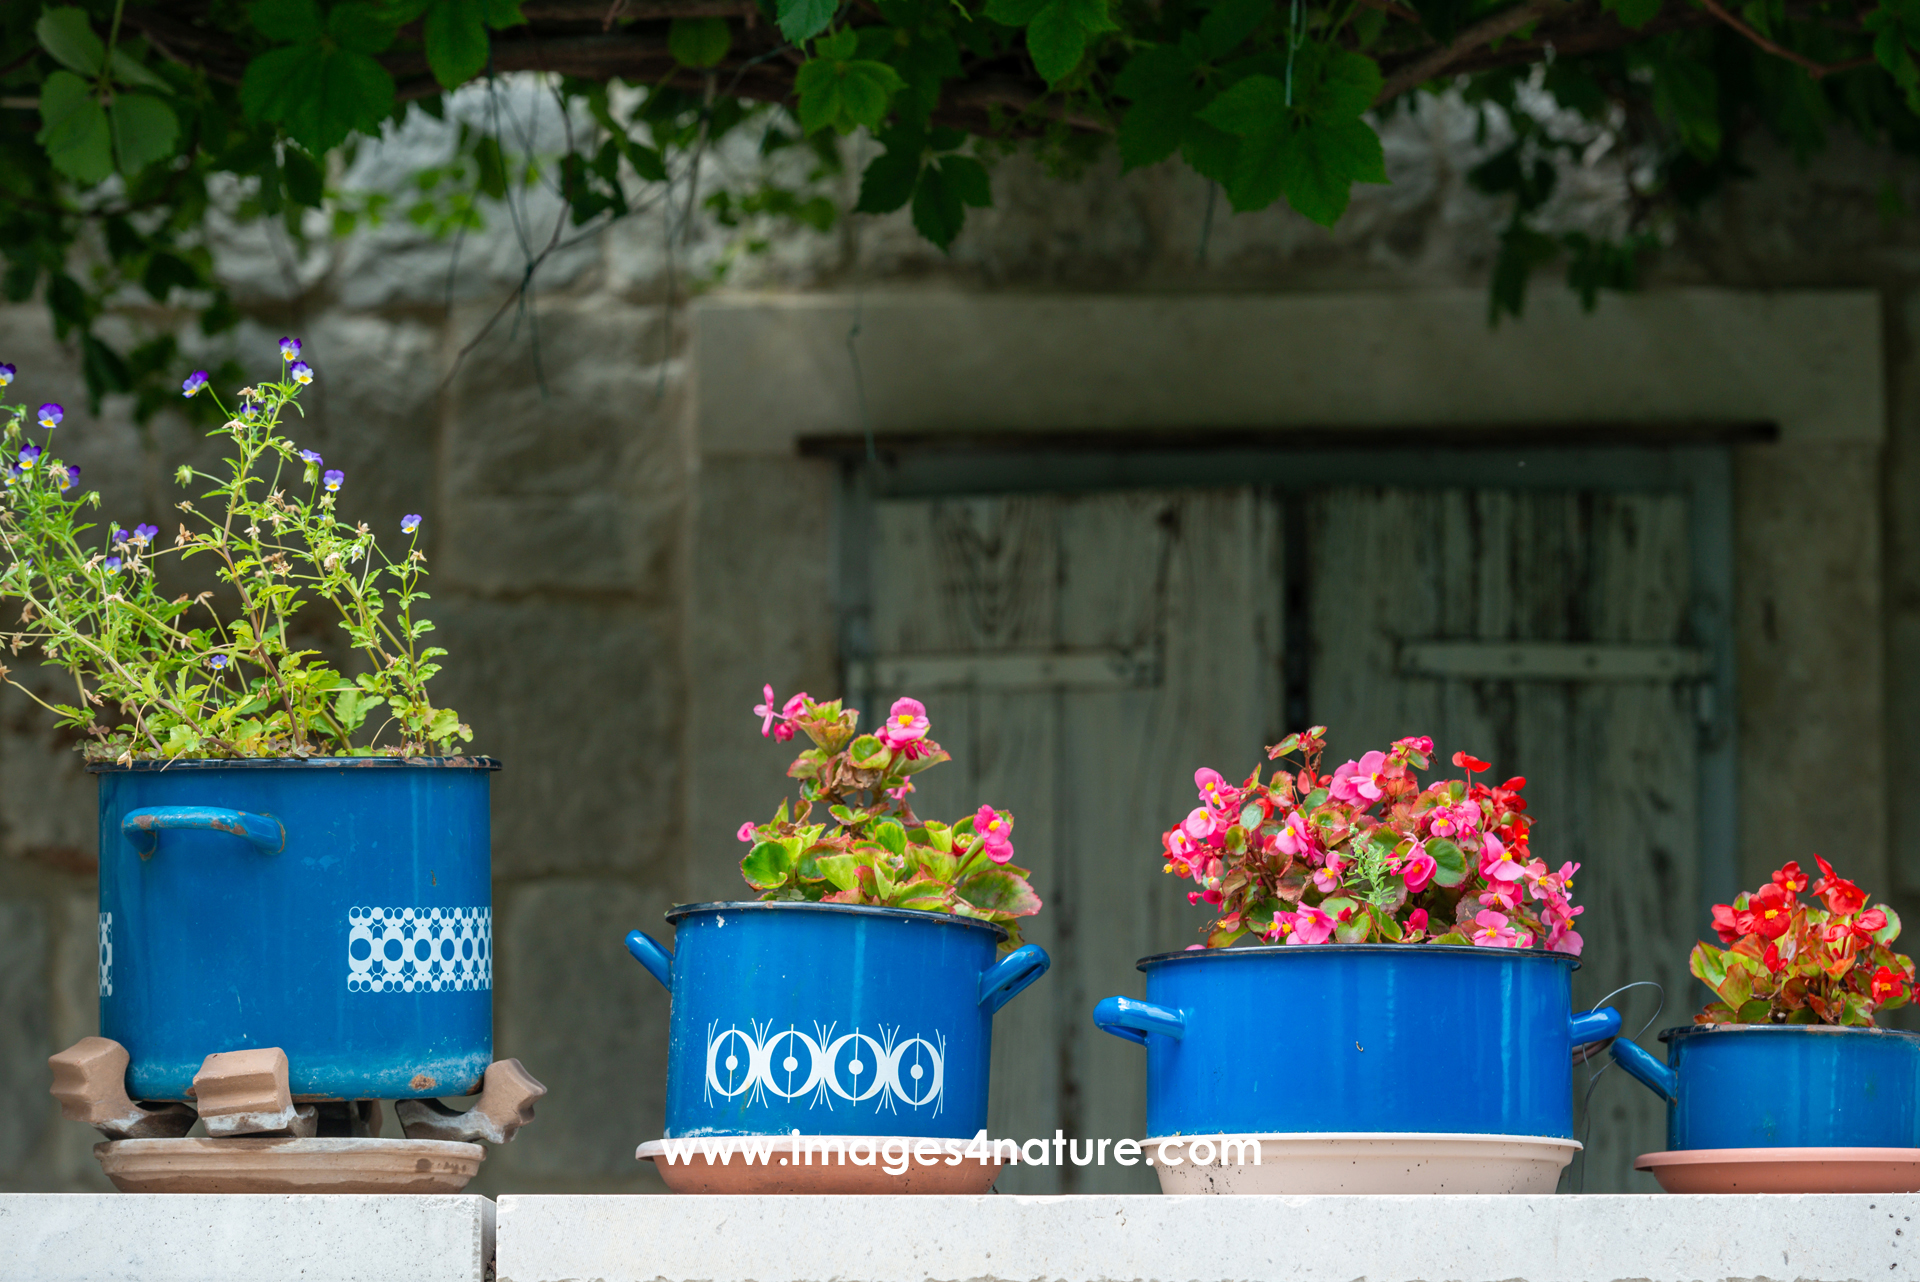 Four blue enamel cooking pots on balcony with flowering plants